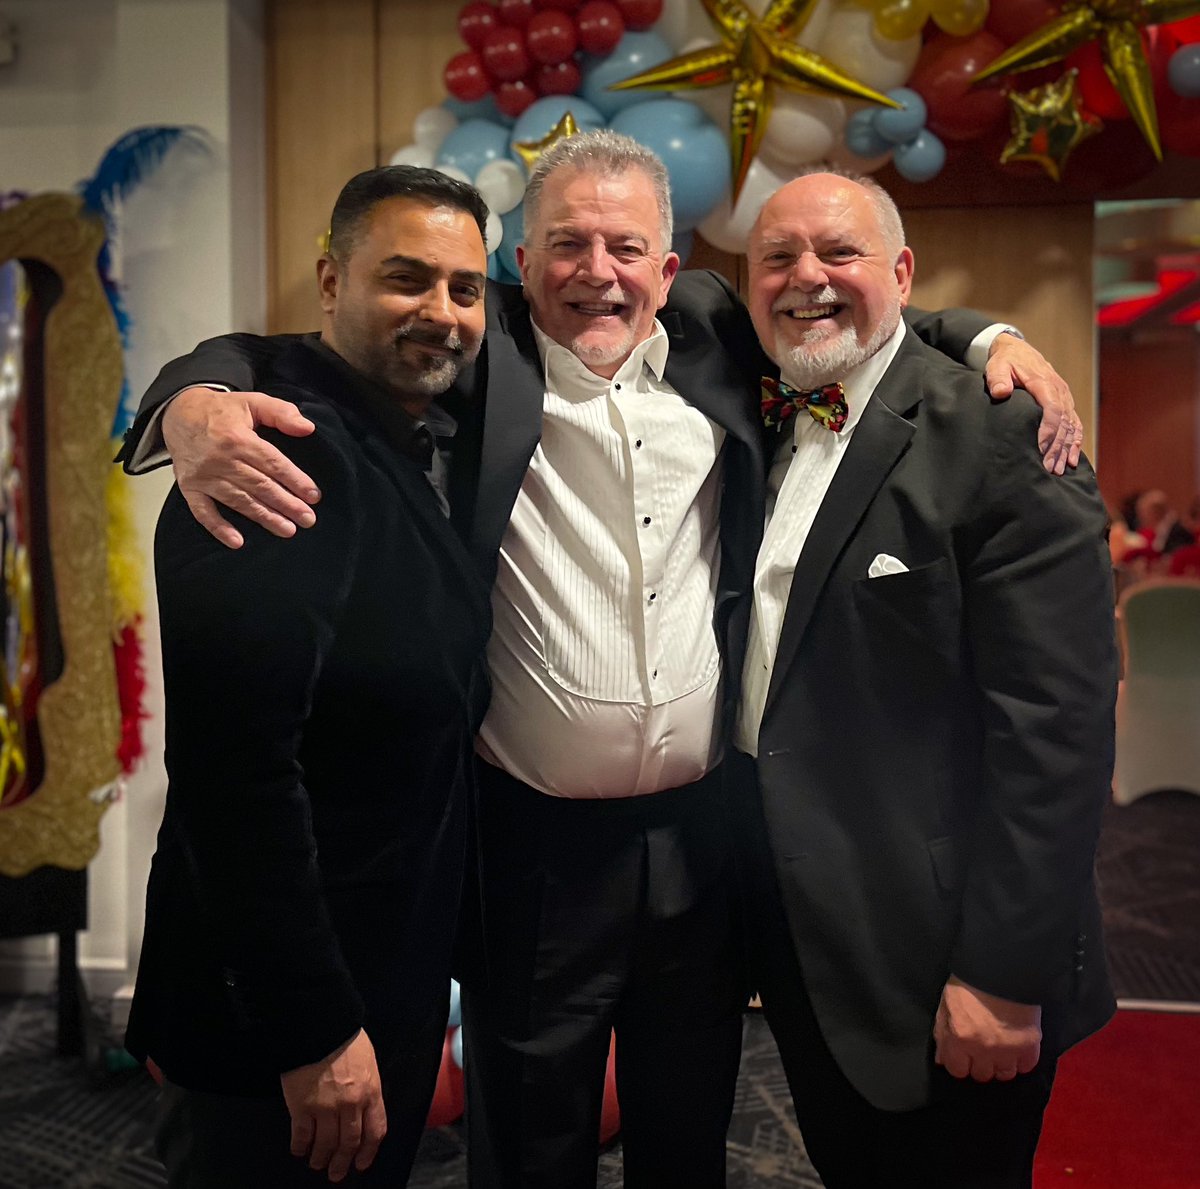 Though our paths crossed in collaboration, we forged bonds not just of partnership but of brotherhood. Grateful for the journey and the companions who make it unforgettable. @MJDaveL @barrypirie59